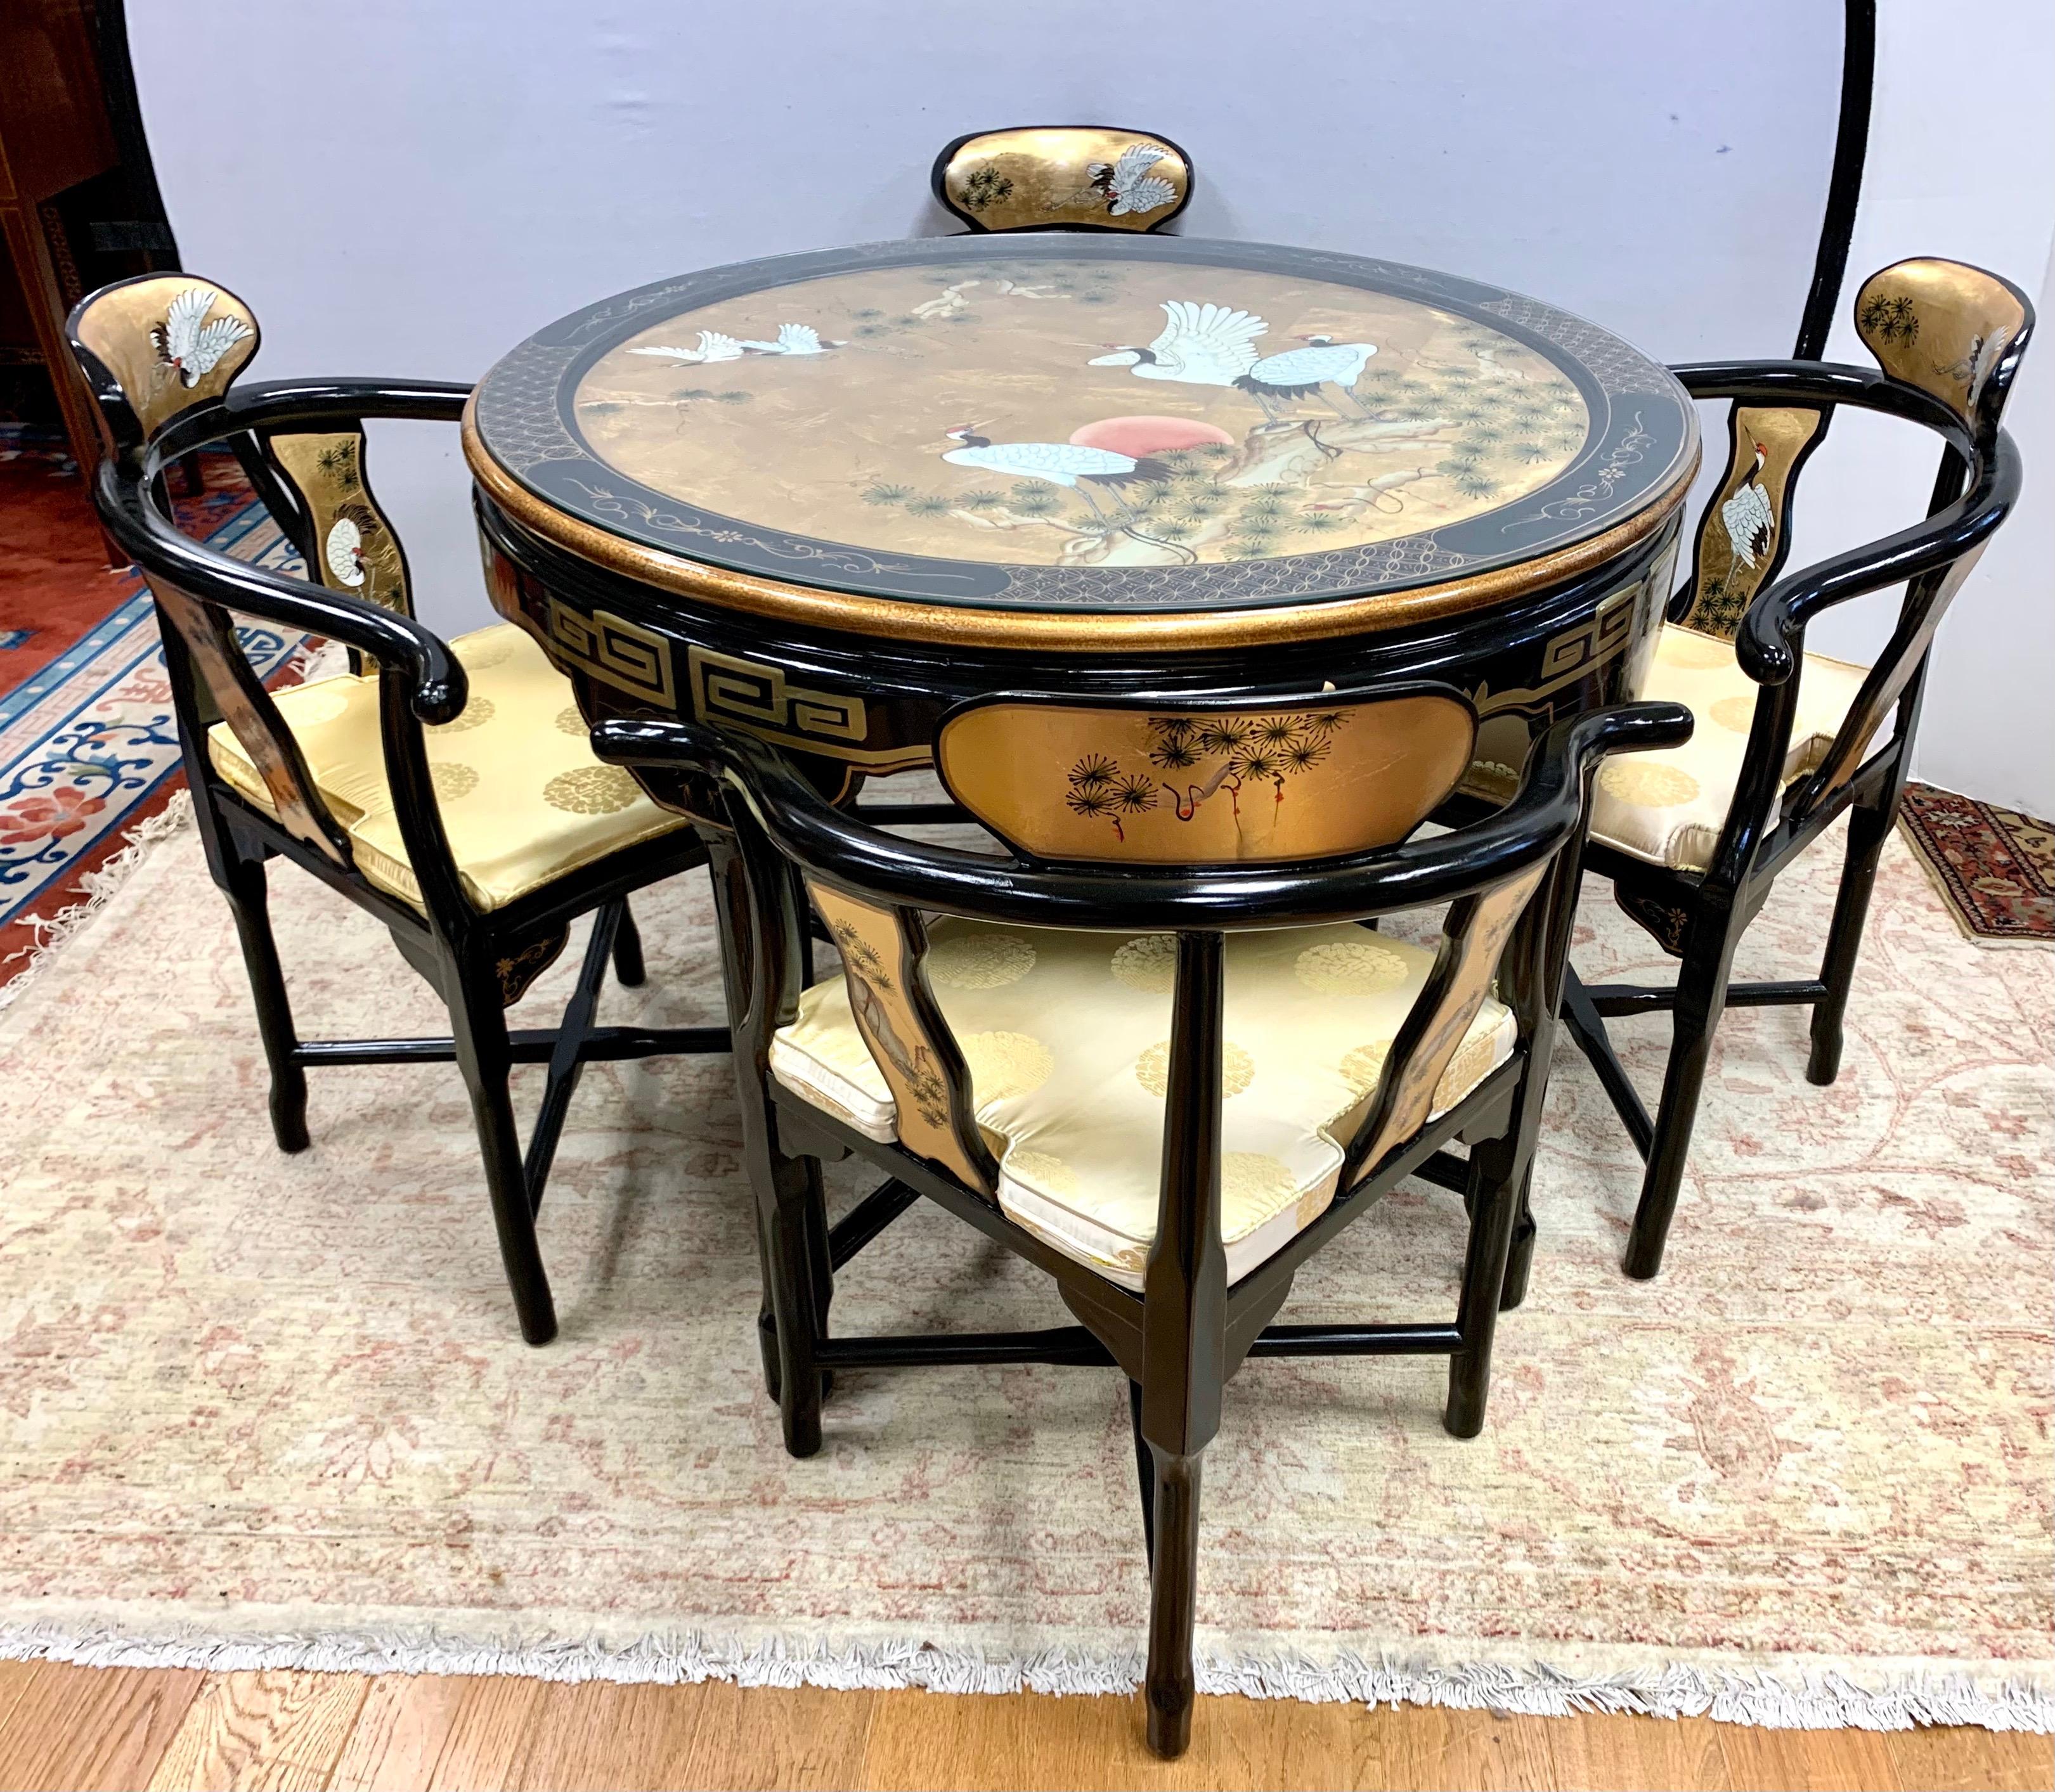 Stunning Chinese black lacquered set includes a table with 4 chairs and features a hand painted motif of cranes and flowers on a gold gilt background. The table top also has a Greek key design in gold on the carved apron. Each chair is painted on